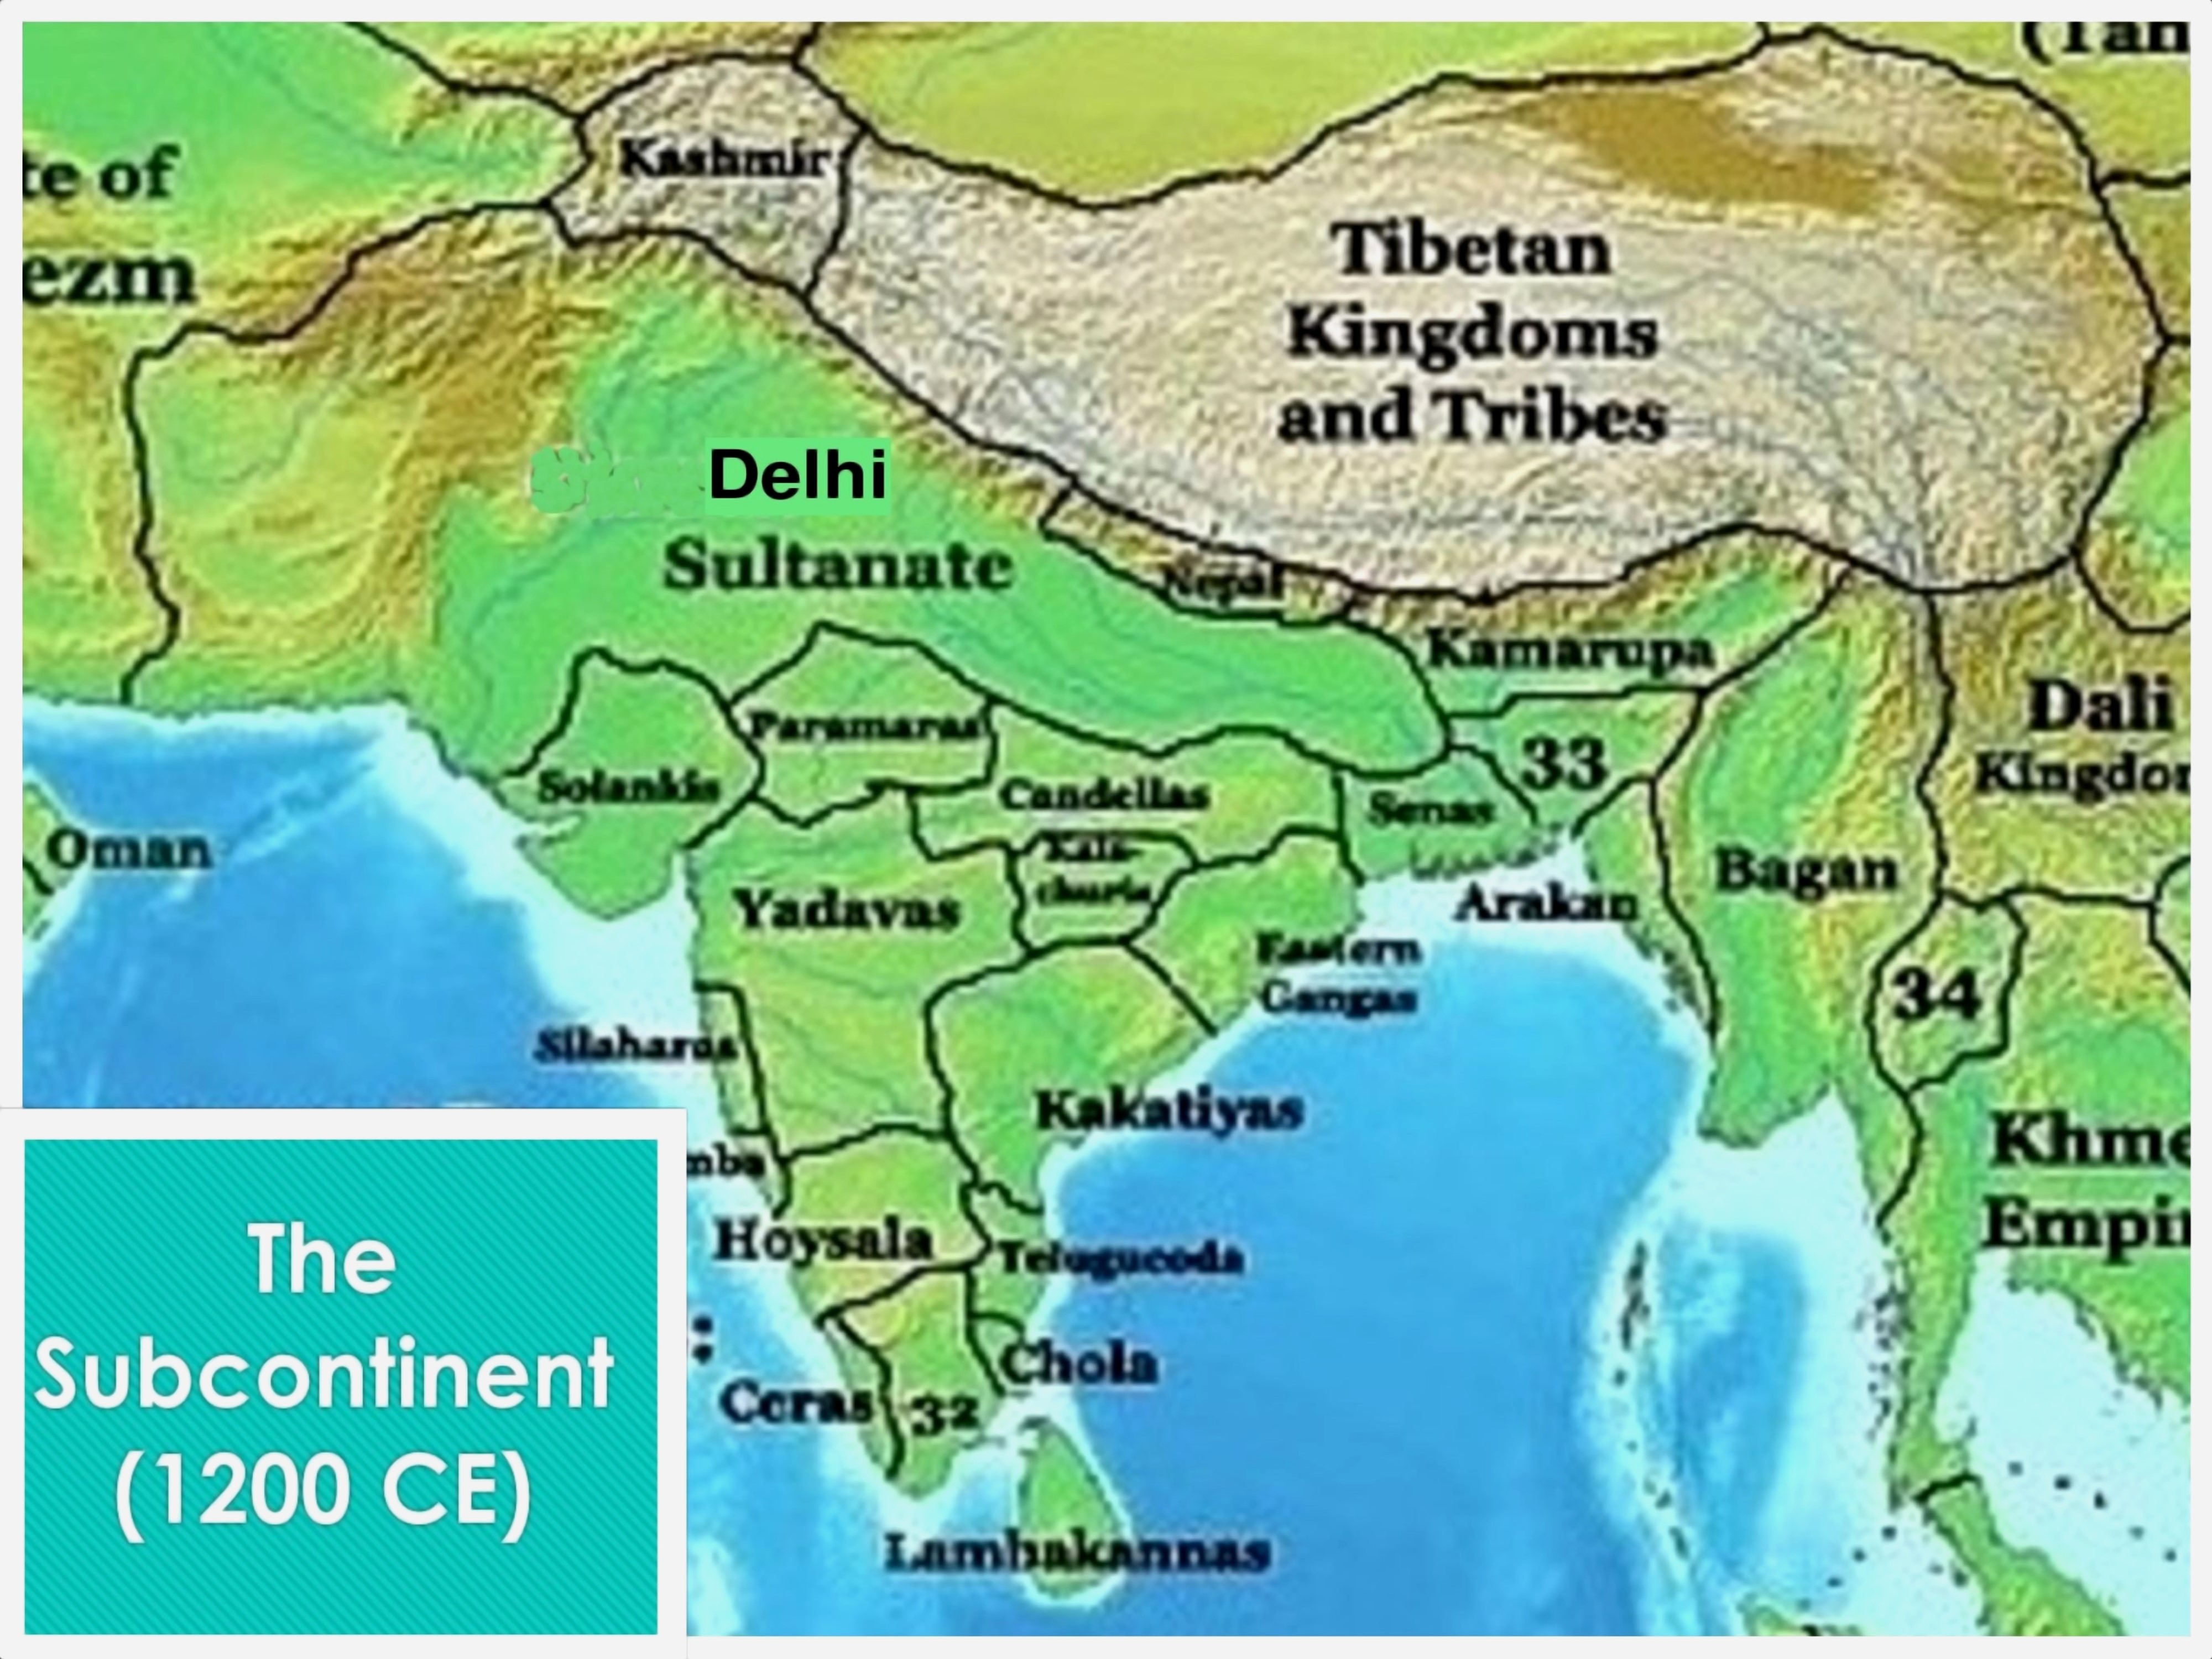 Indian Subcontinent in 1200 CE, showing the Yadava Dynasty and its neighbors